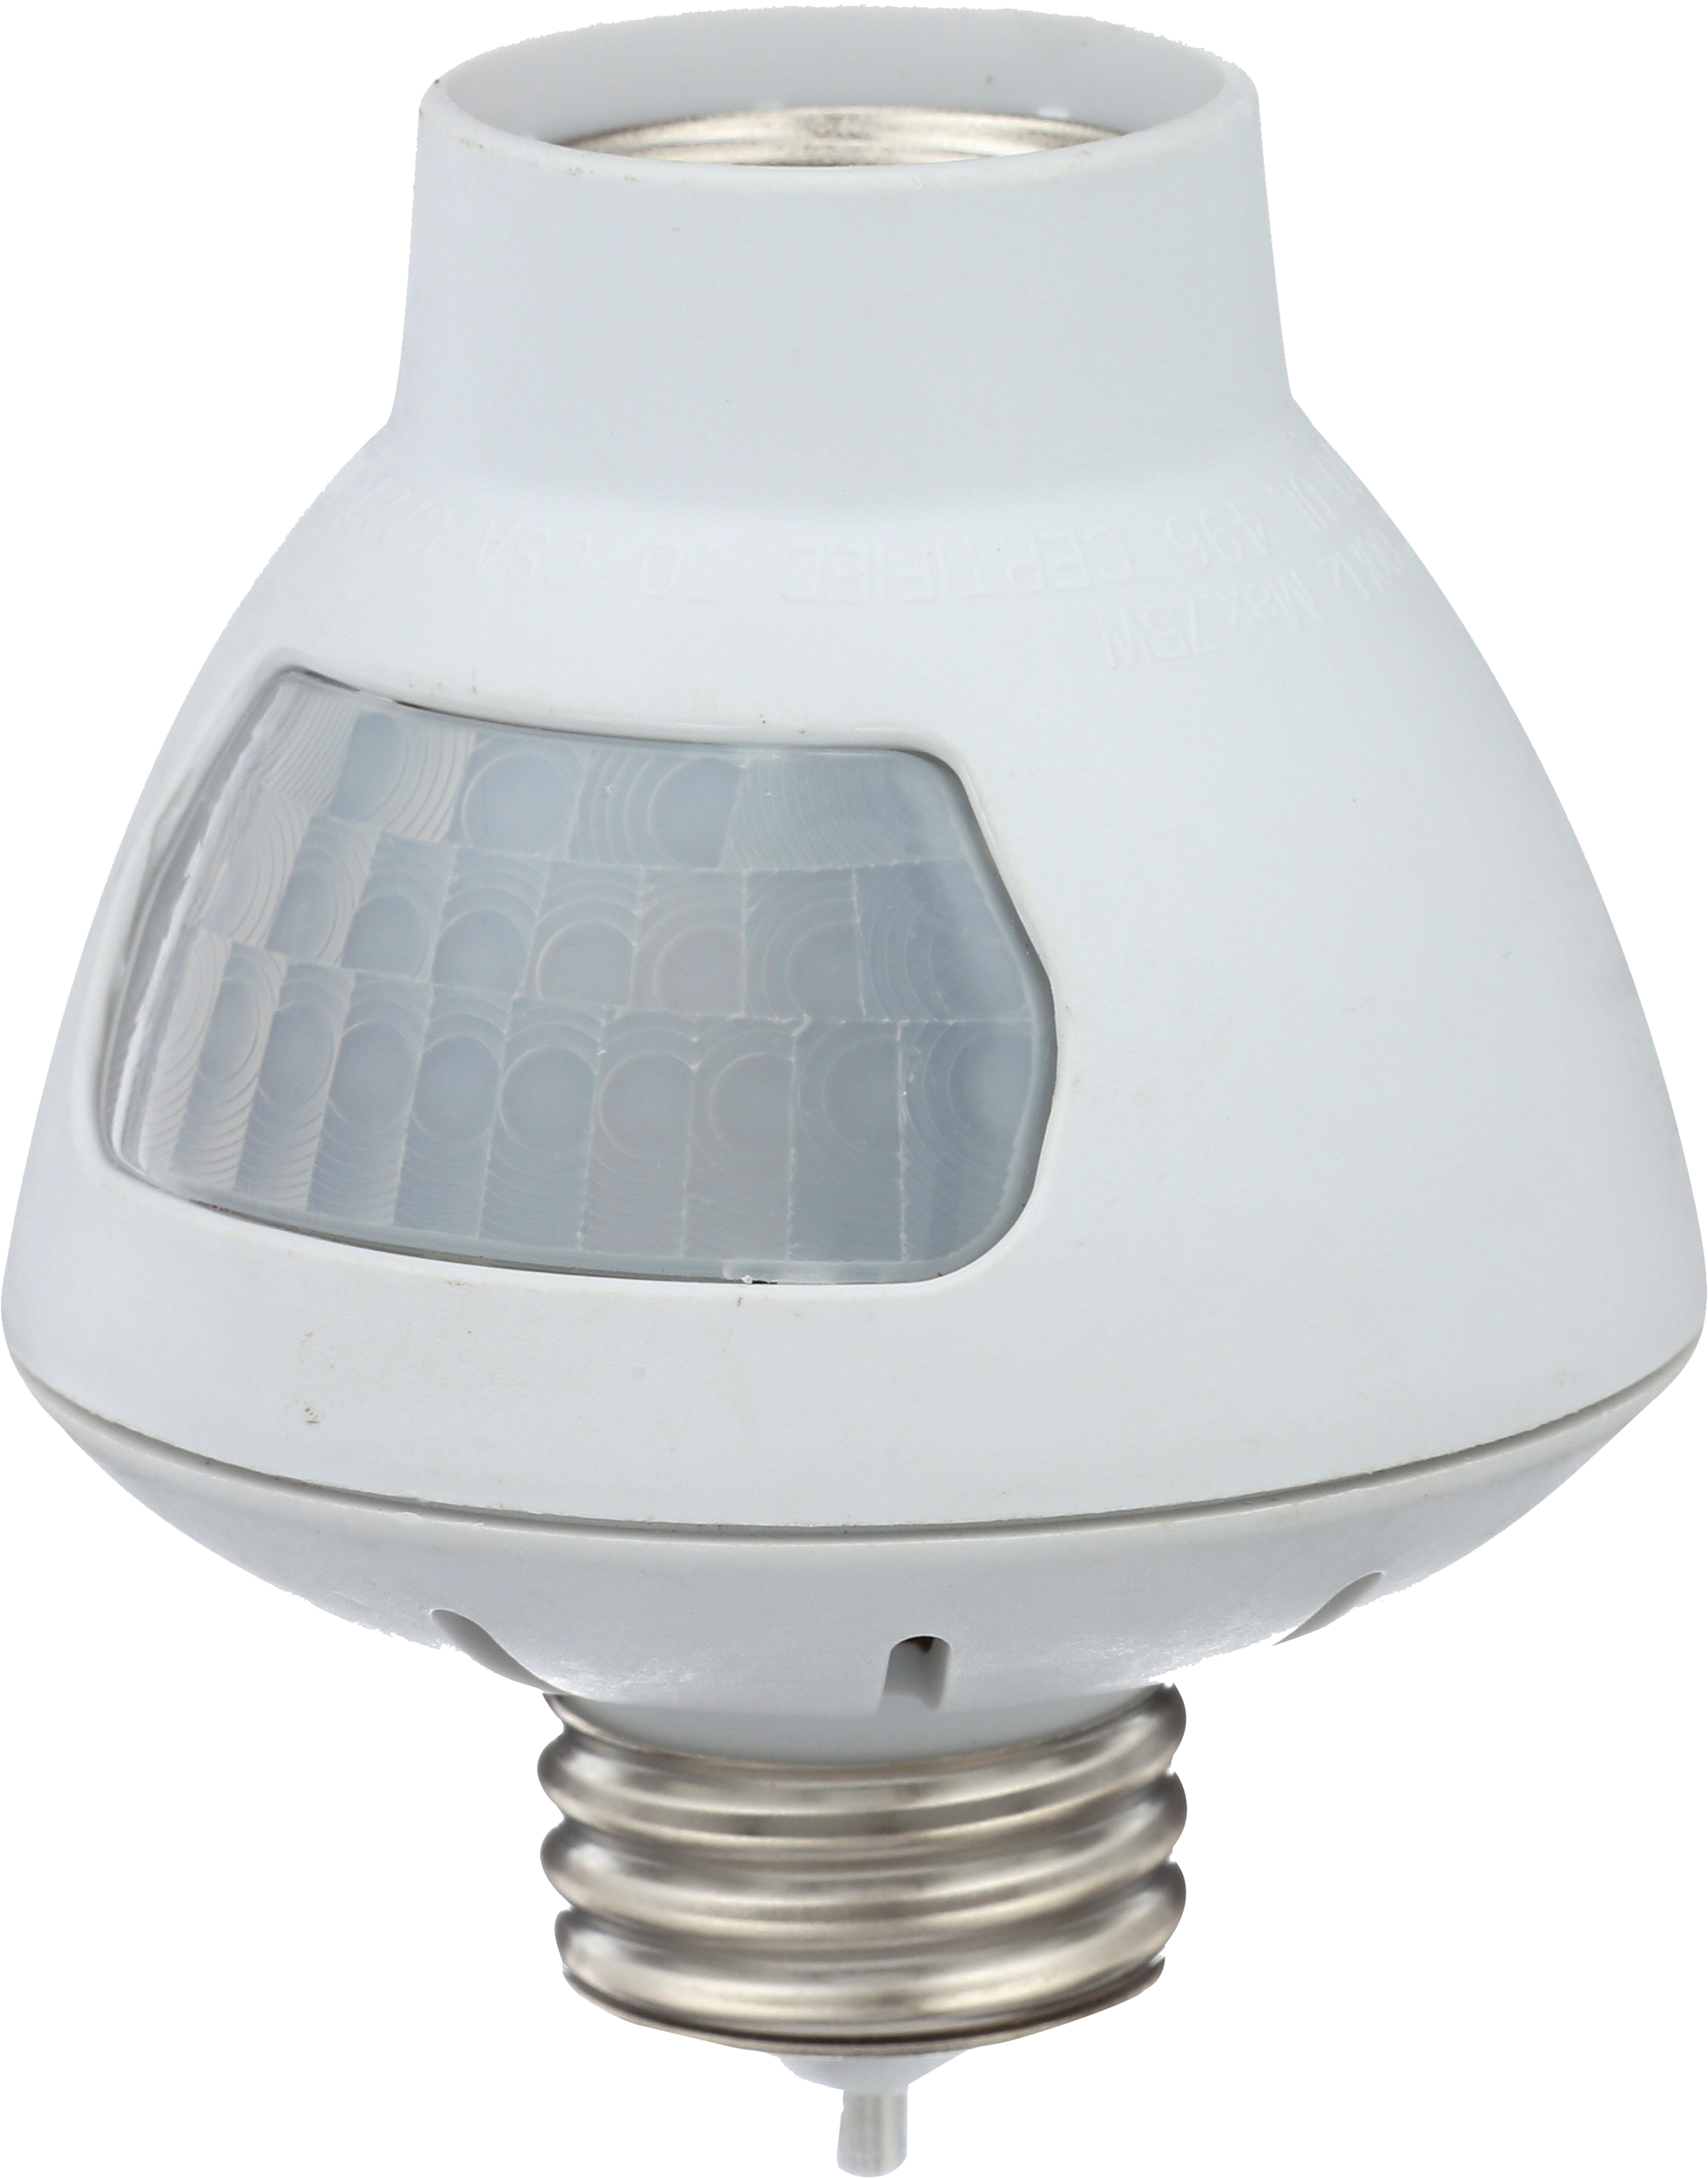 Indoor 120° Motion Activated Light Control | MLC162